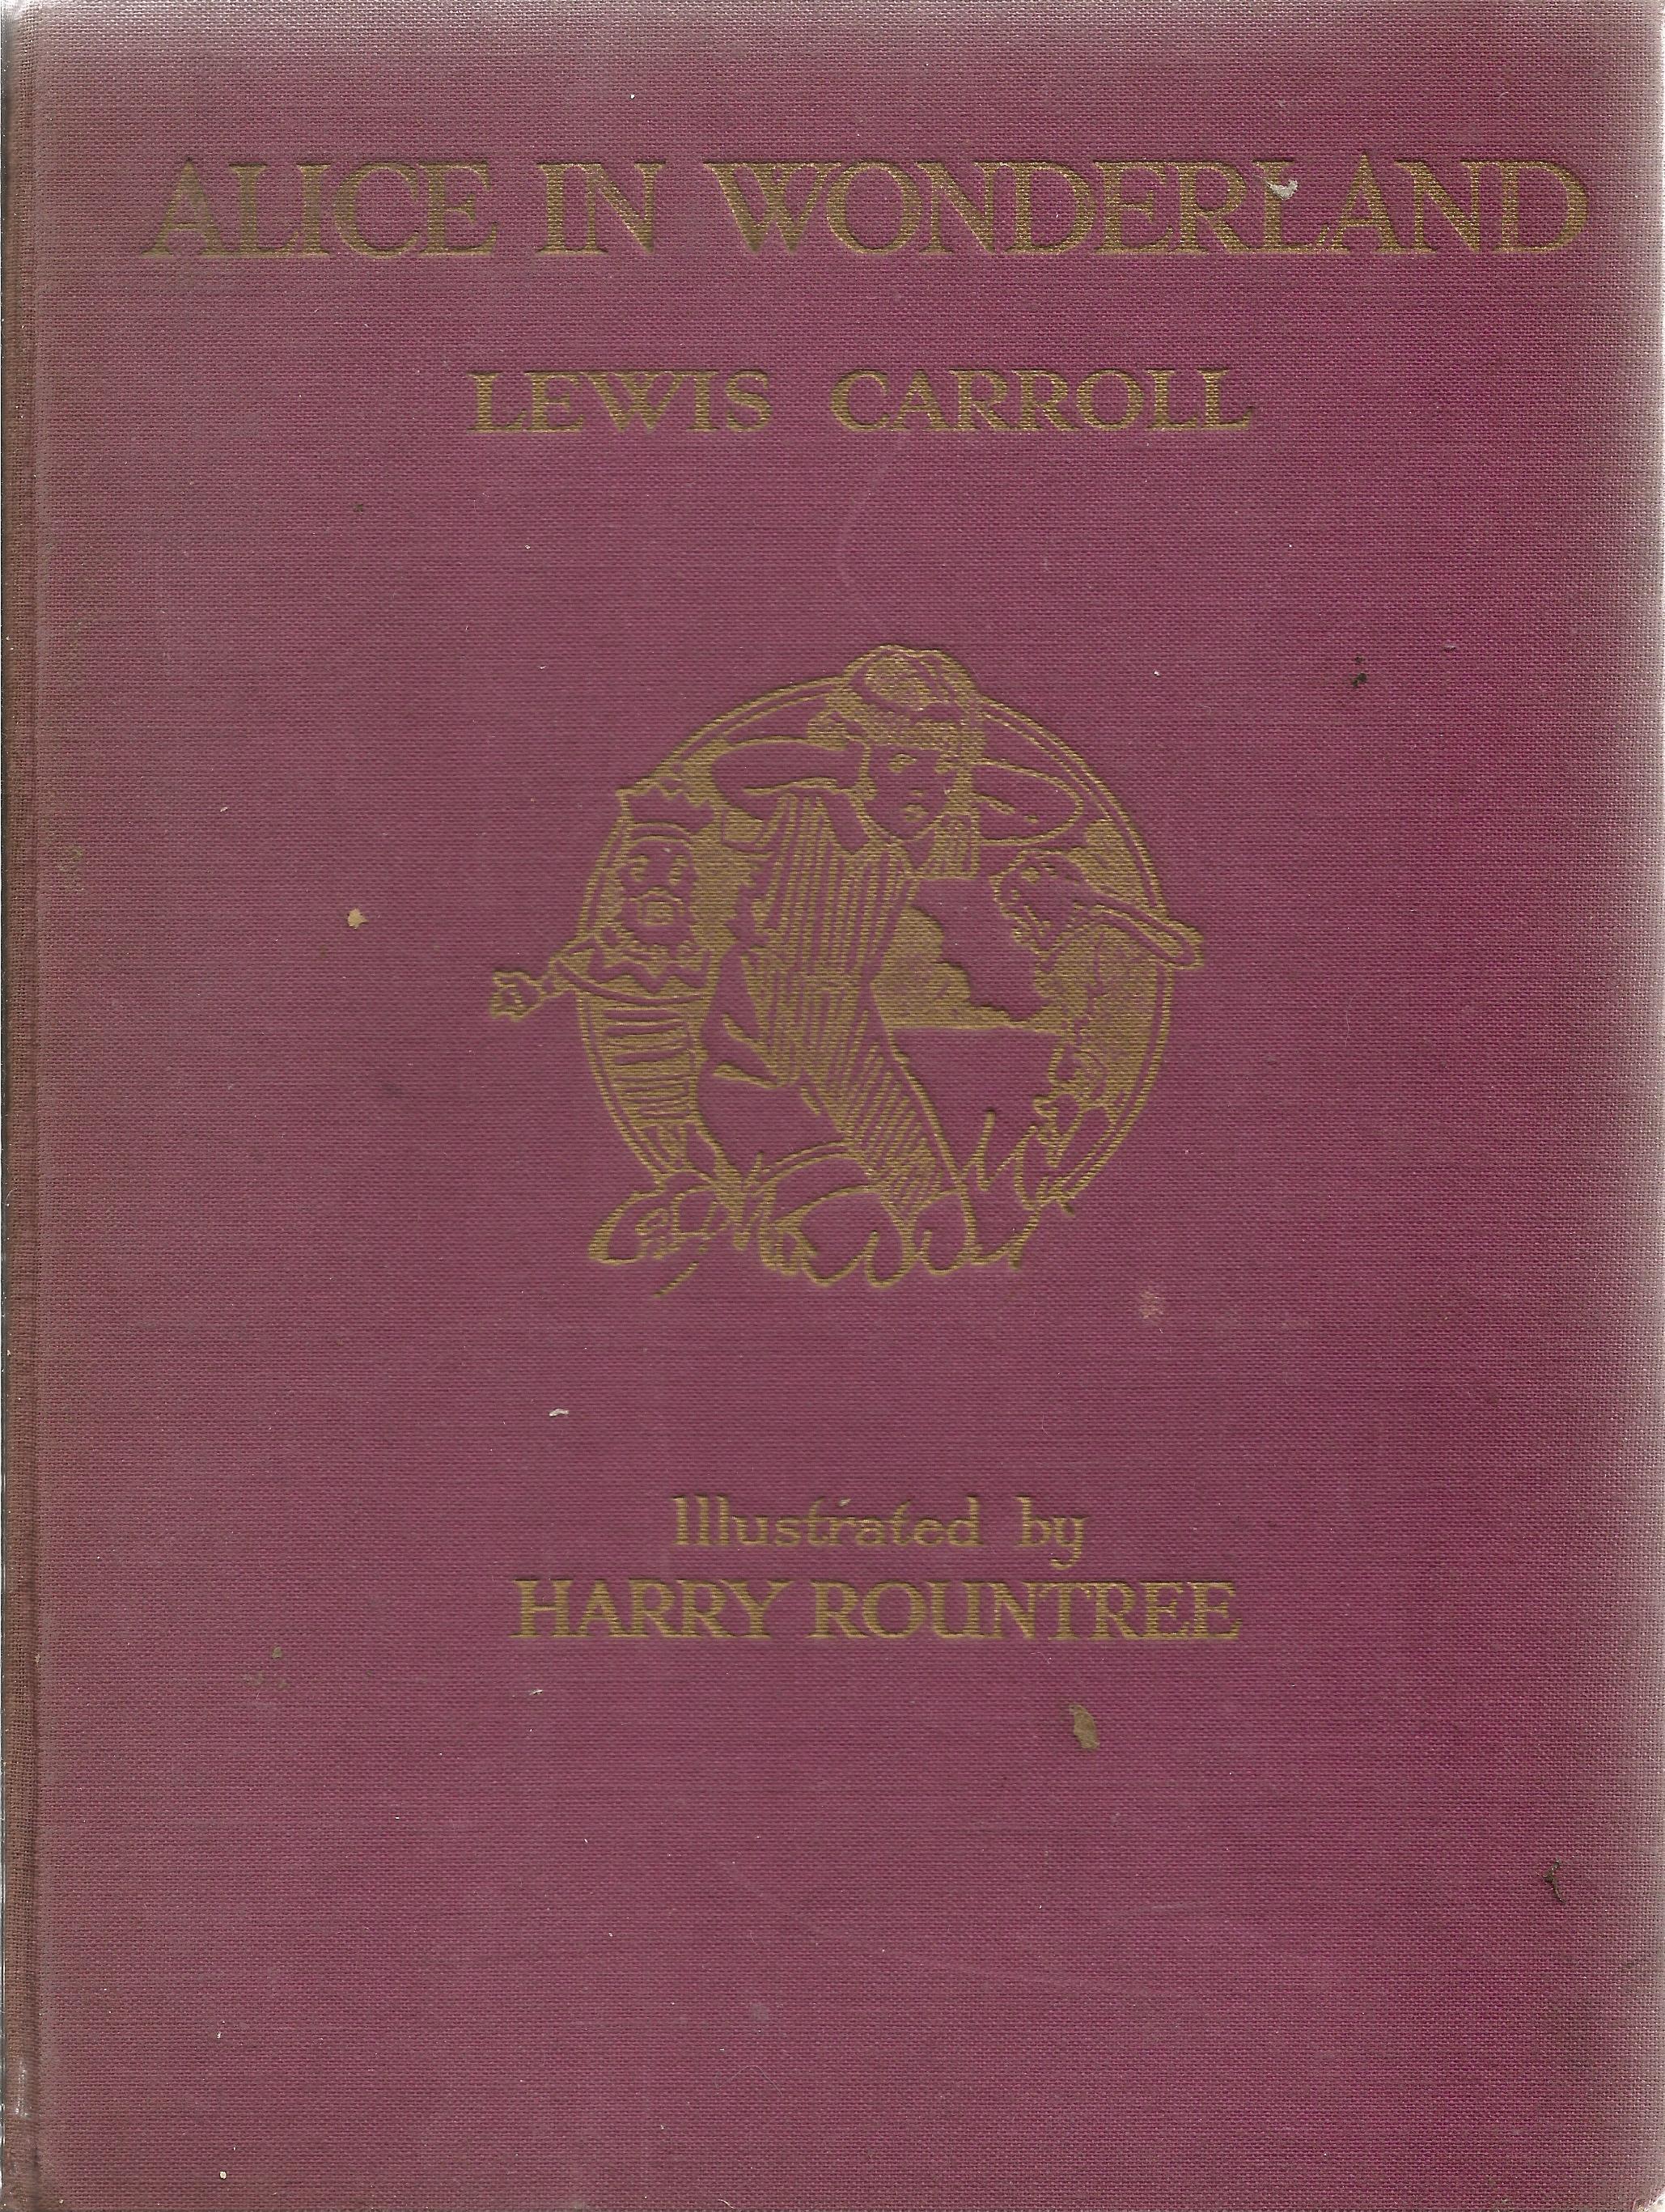 Lewis Carroll hardback book Alice's Adventures in Wonderland published by Collins' Clear-Type